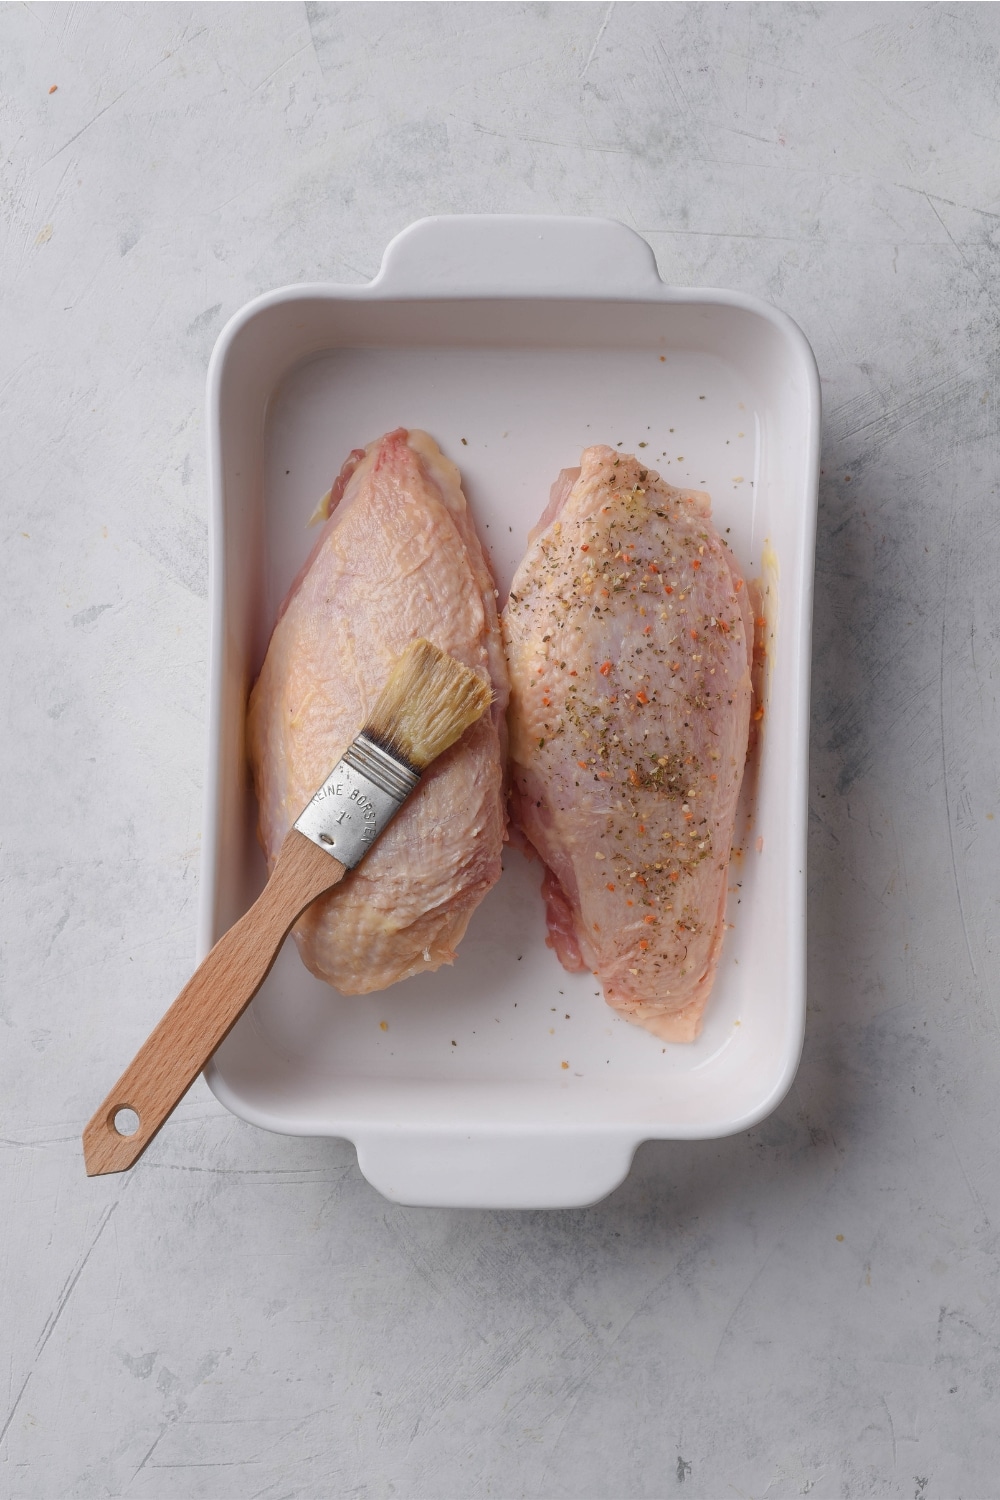 A baking dish with two raw chicken breasts in it. One has been seasoned and one is being brushed with a basting brush.